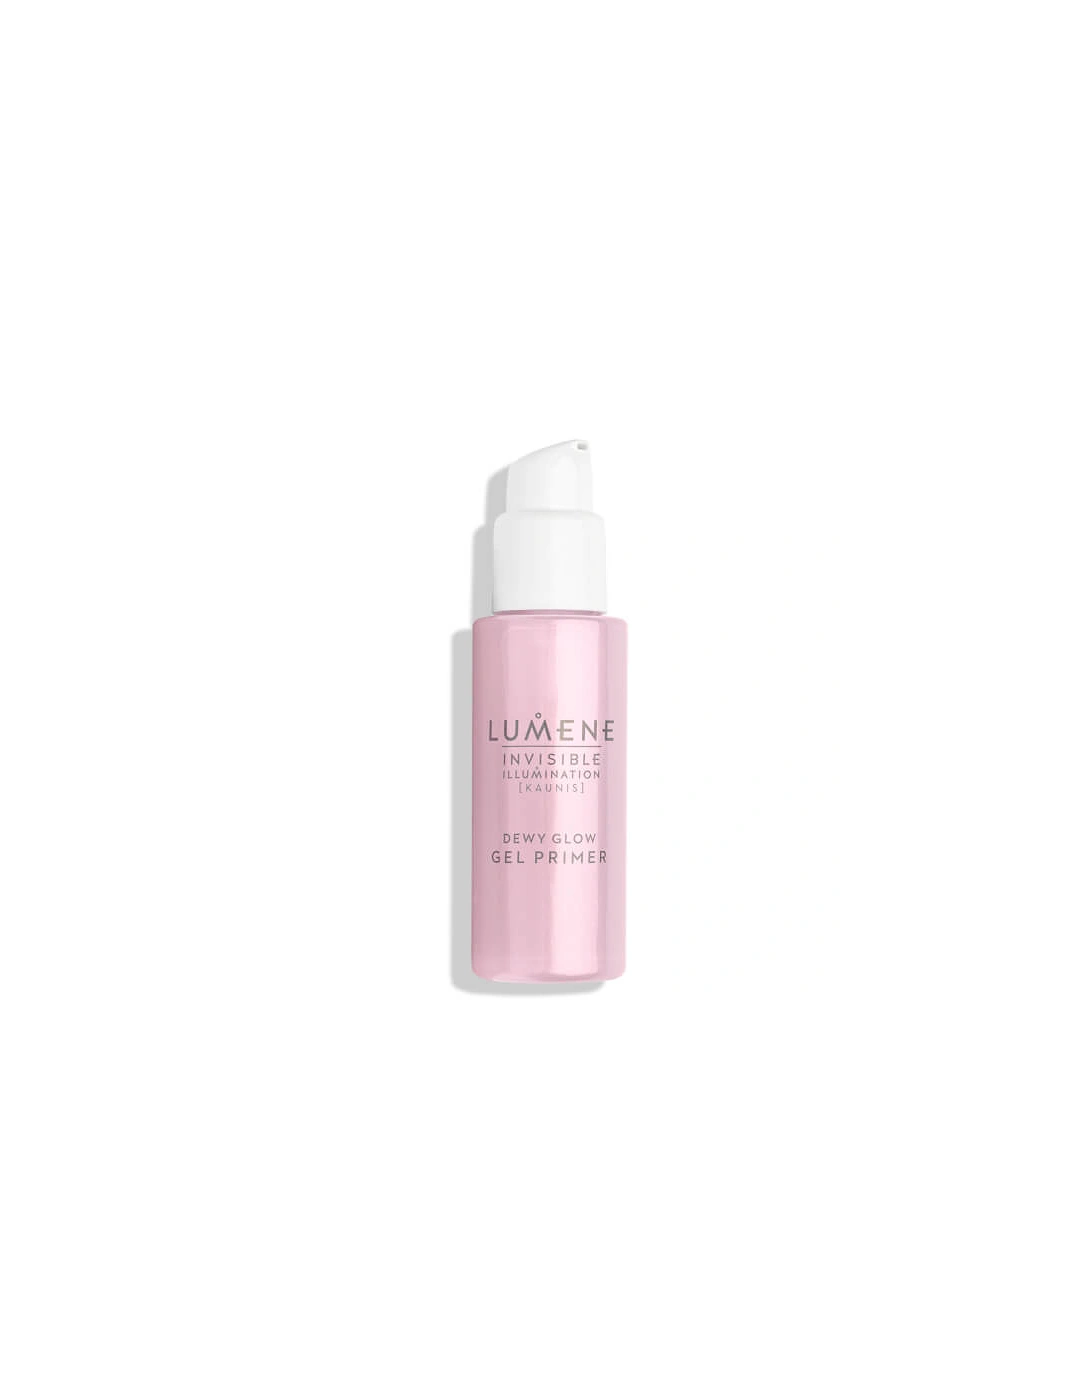 Invisible Illumination Dewy Glow Gel Primer 30ml, 2 of 1